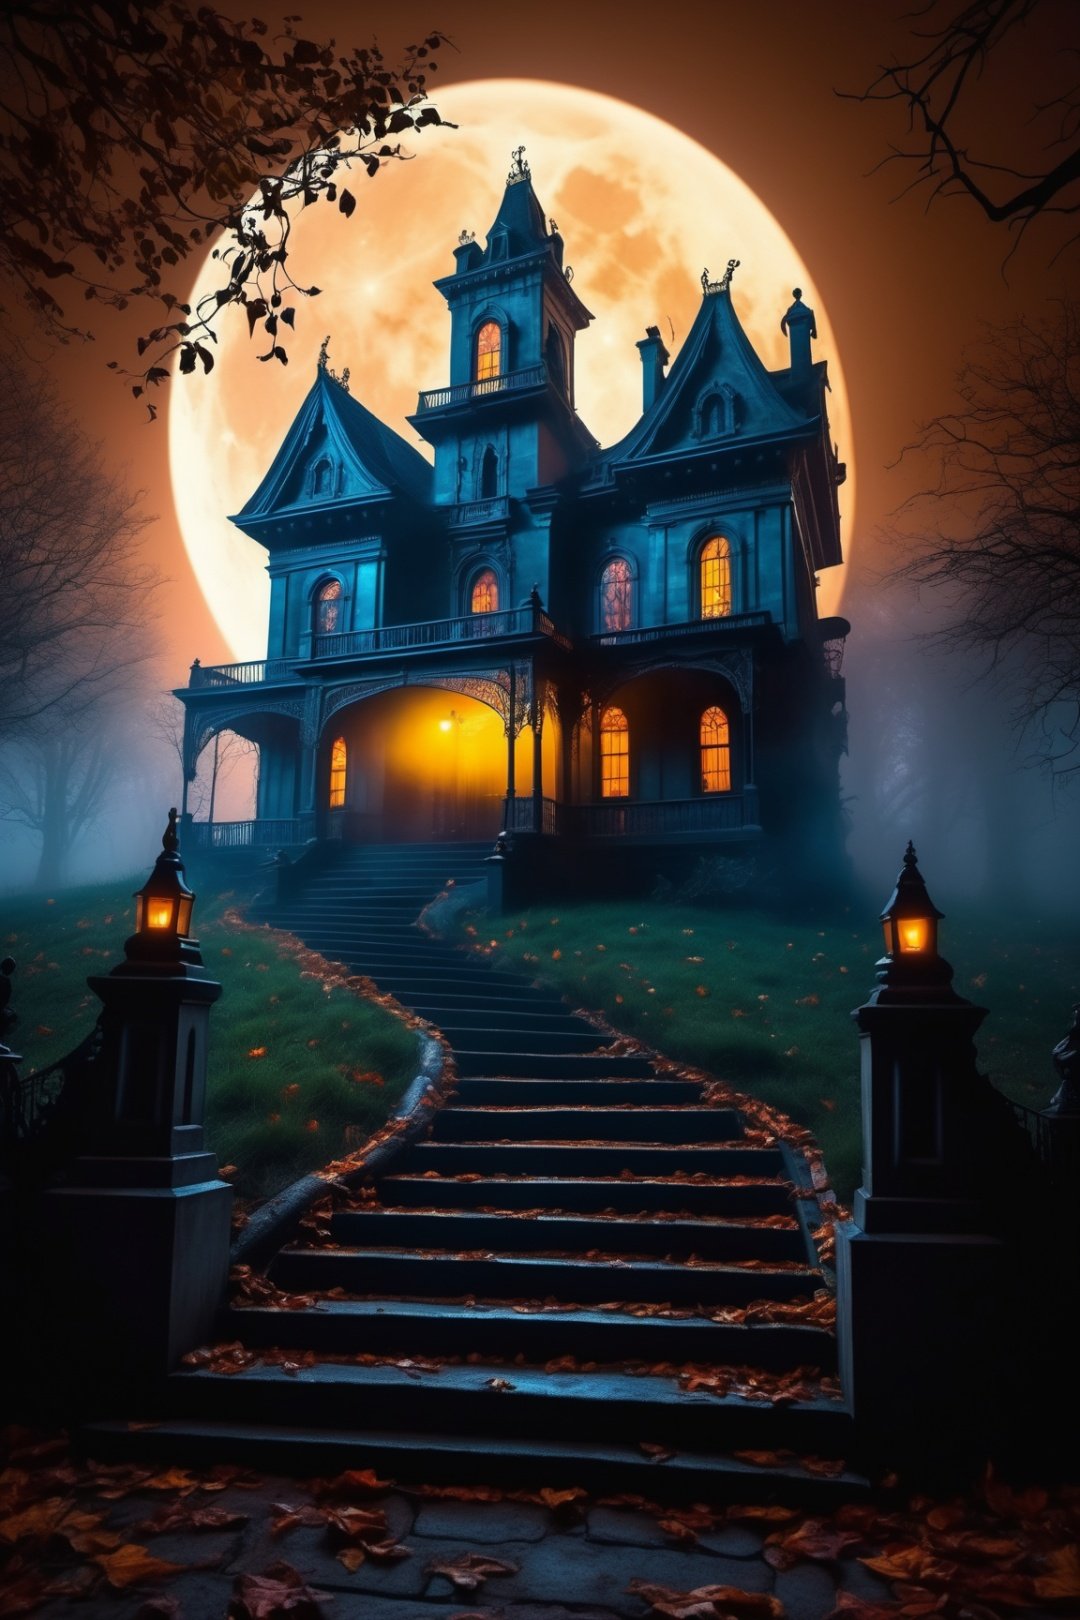 (best quality,4k,8k,highres,masterpiece:1.2),ultra-detailed,(realistic,photorealistic,photo-realistic:1.37),ghosts,haunted mansion,dark atmosphere,spooky,ethereal,nighttime,creepy forest,bats,foggy graveyard,hauntingly beautiful,full moon,candlelight,shadowy figures,misty,haunted spirits,eerie,ominous,macabre,spiraling staircase,haunting melody,gothic architecture,vivid colors,dramatic lighting,phantasmagorical transformation, GhostlyStyle